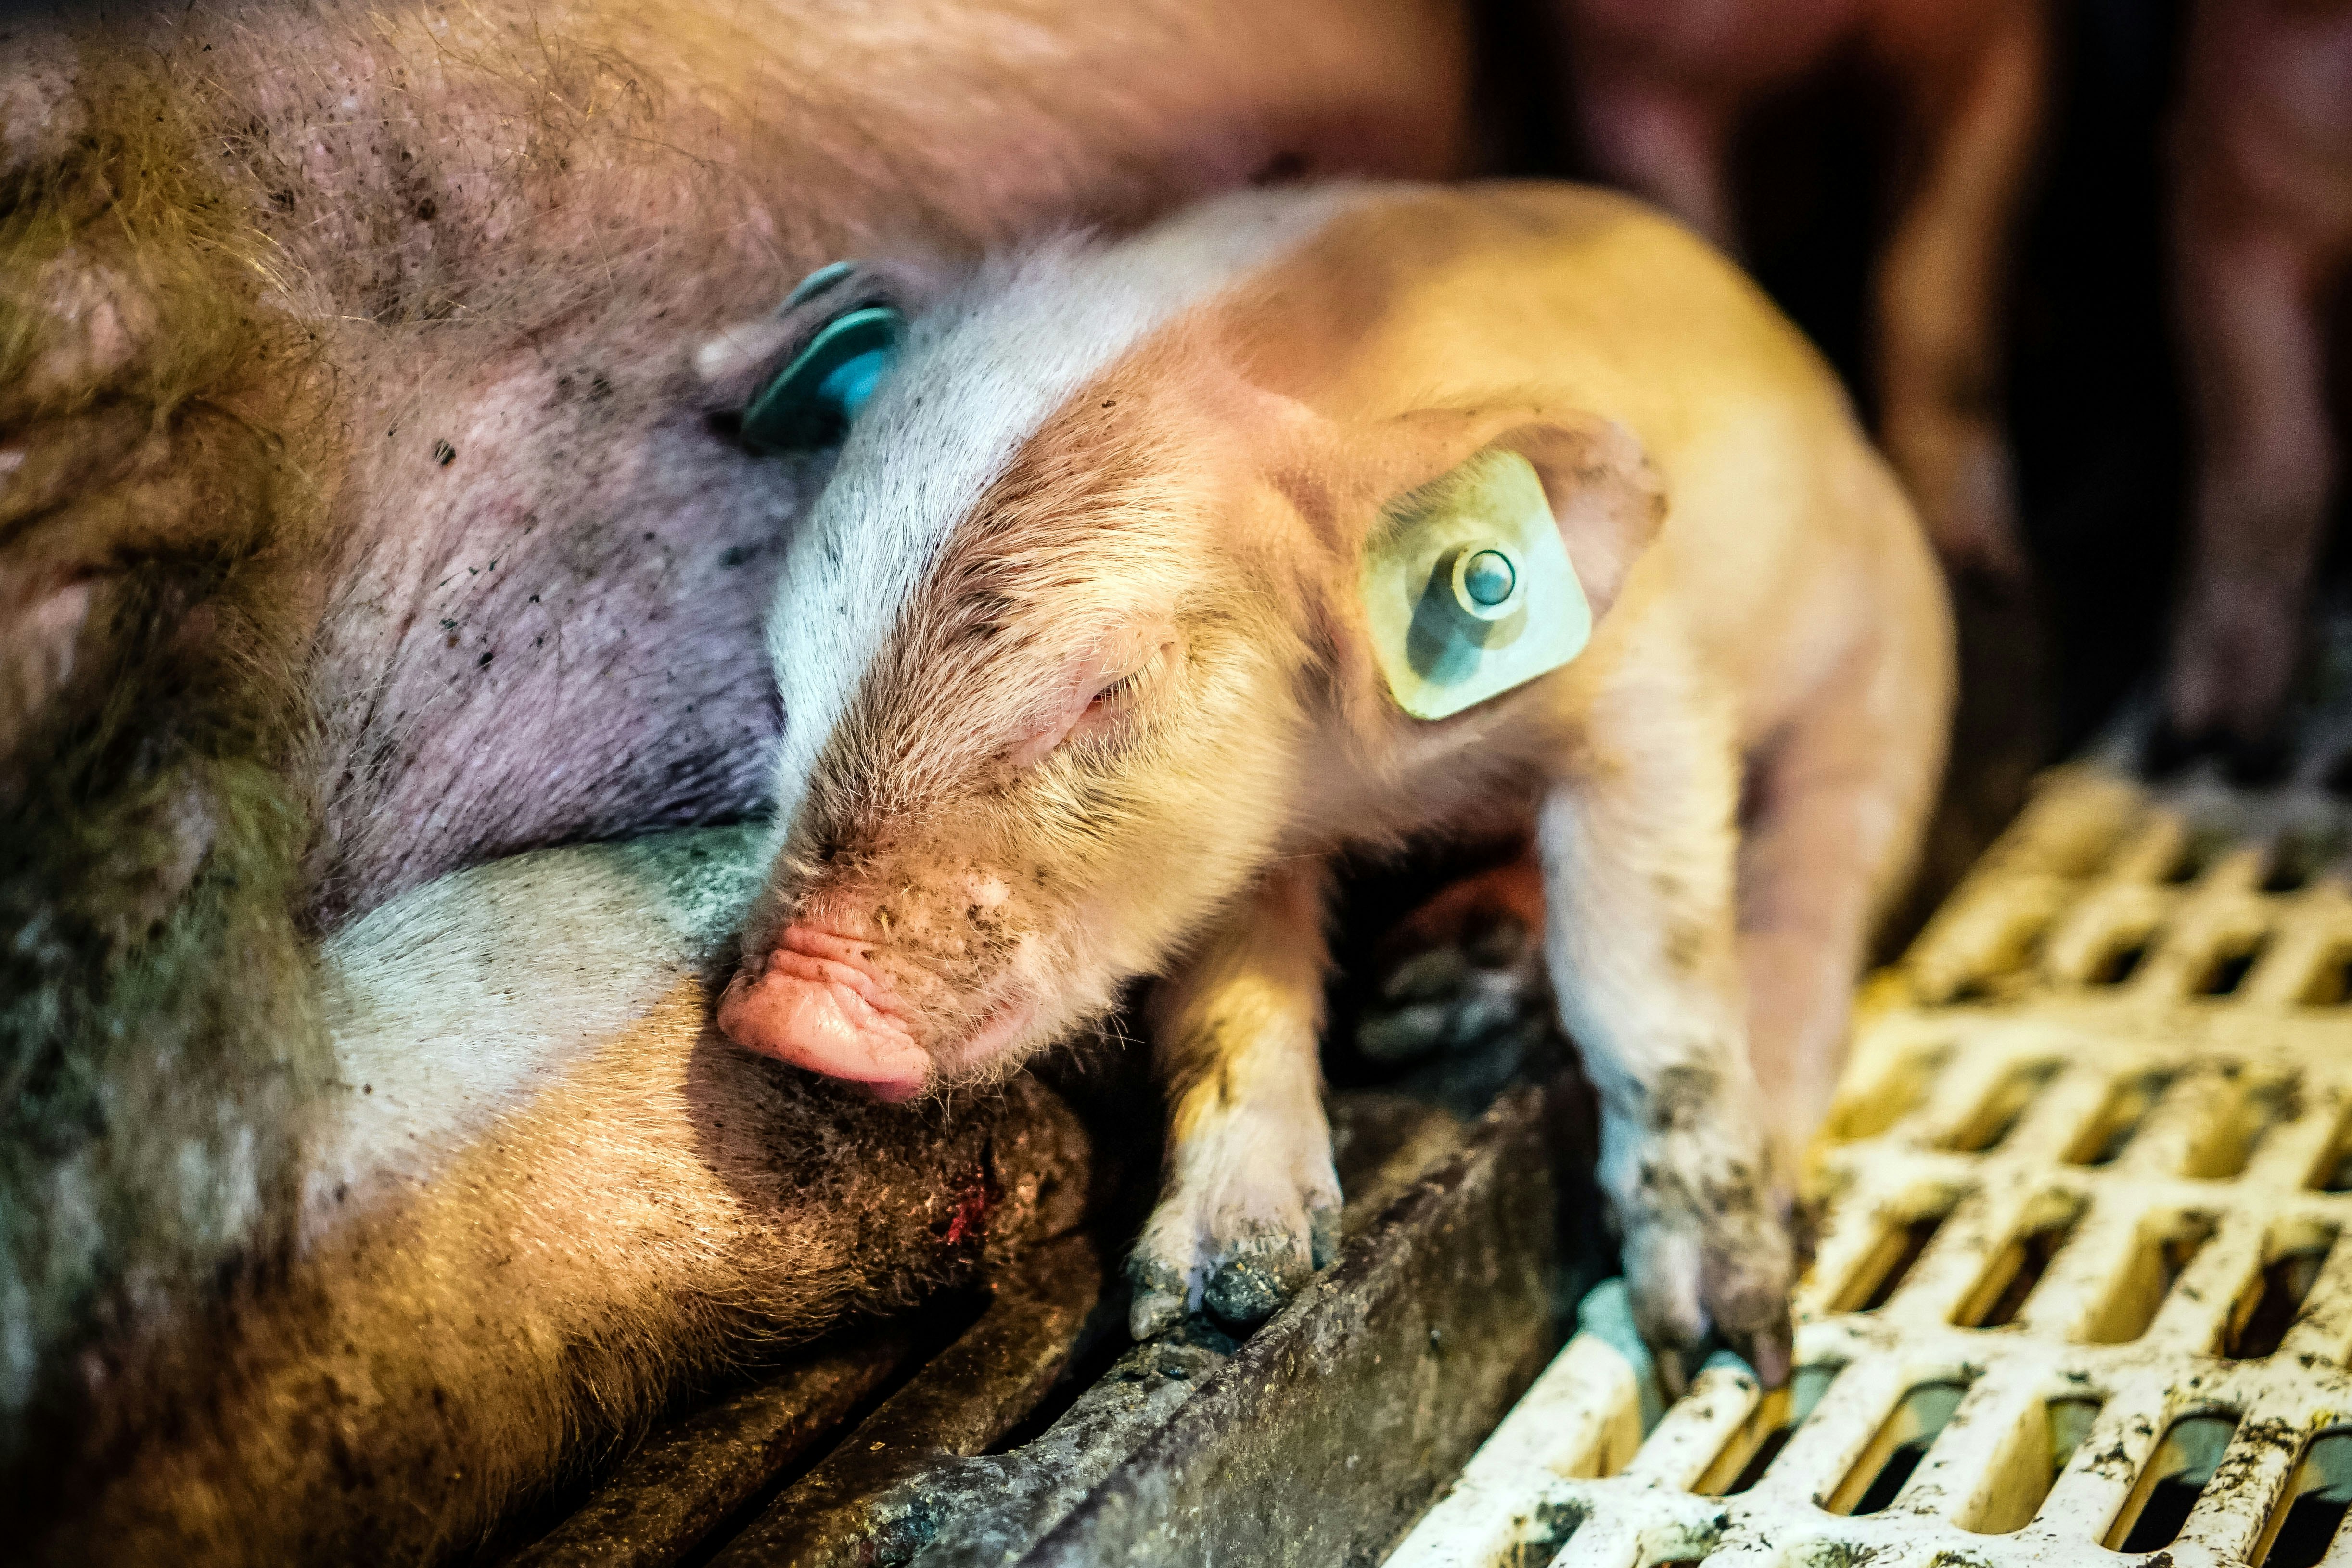 FBI Hunt for Missing Piglets Is About Protecting Factory Farms